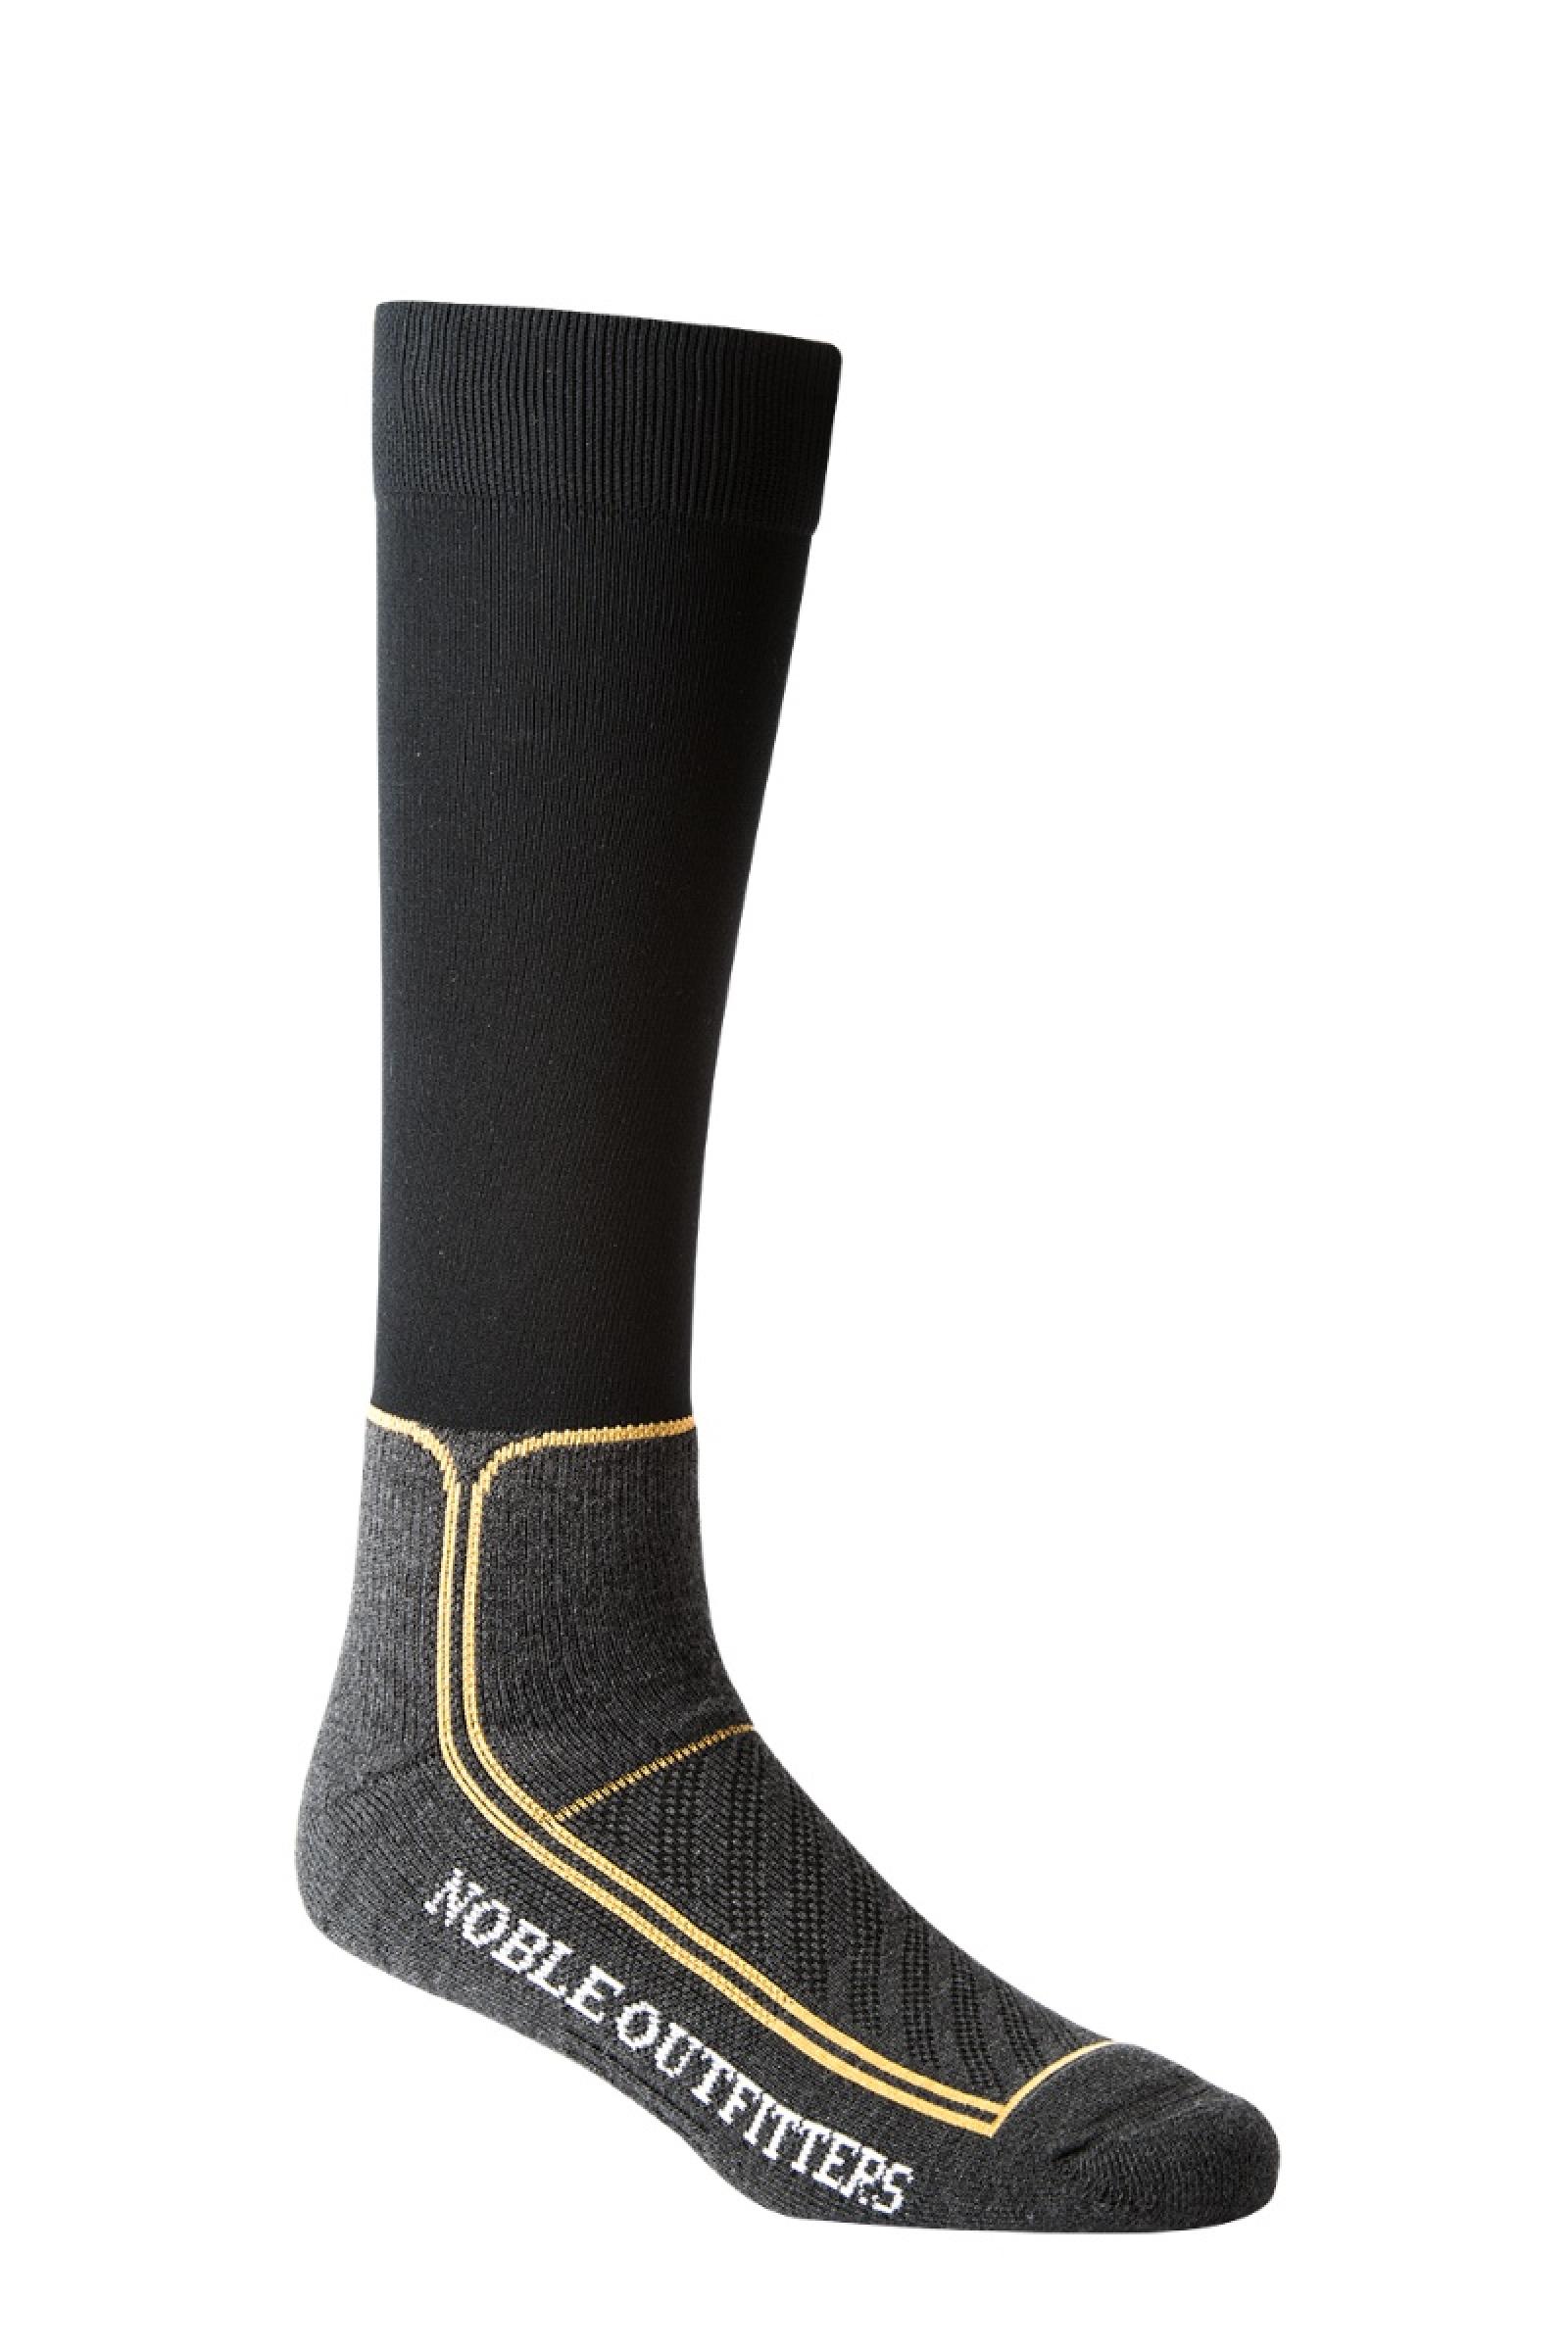 Noble Outfitters ThermoThin Sock